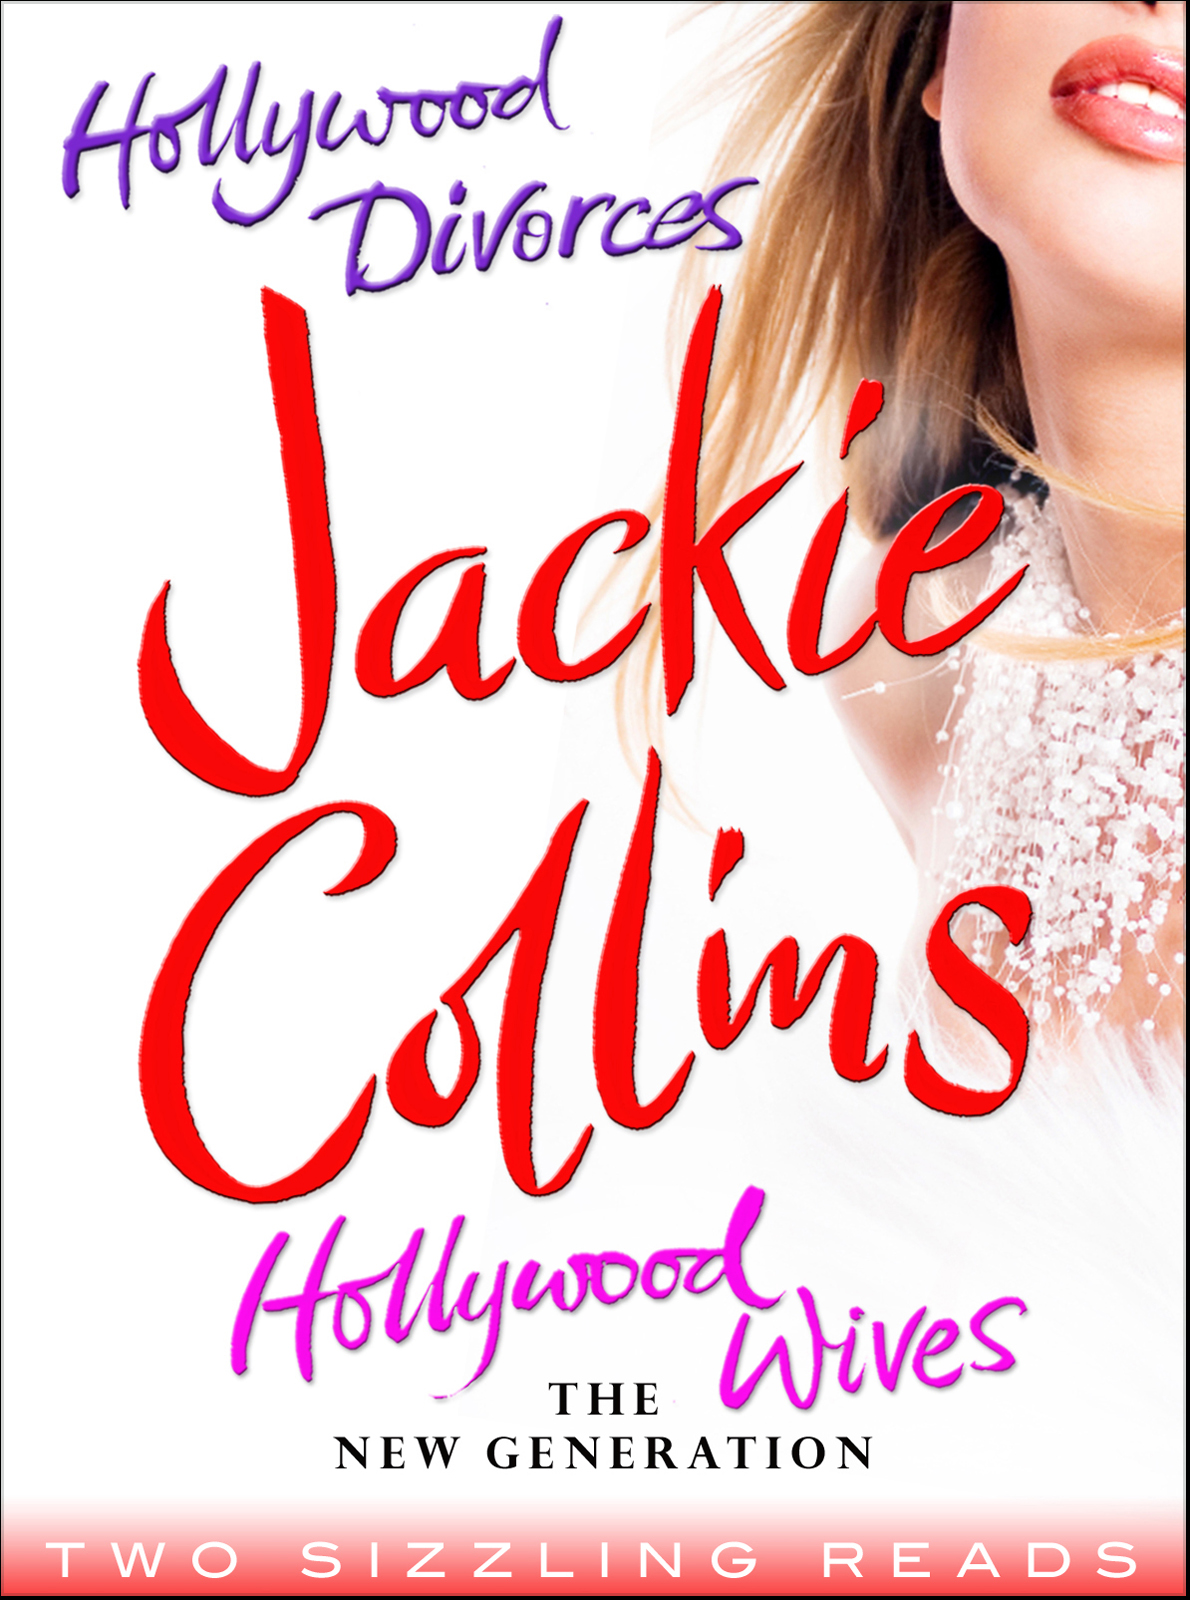 Hollywood Divorces / Hollywood Wives: The New Generation by Jackie Collins